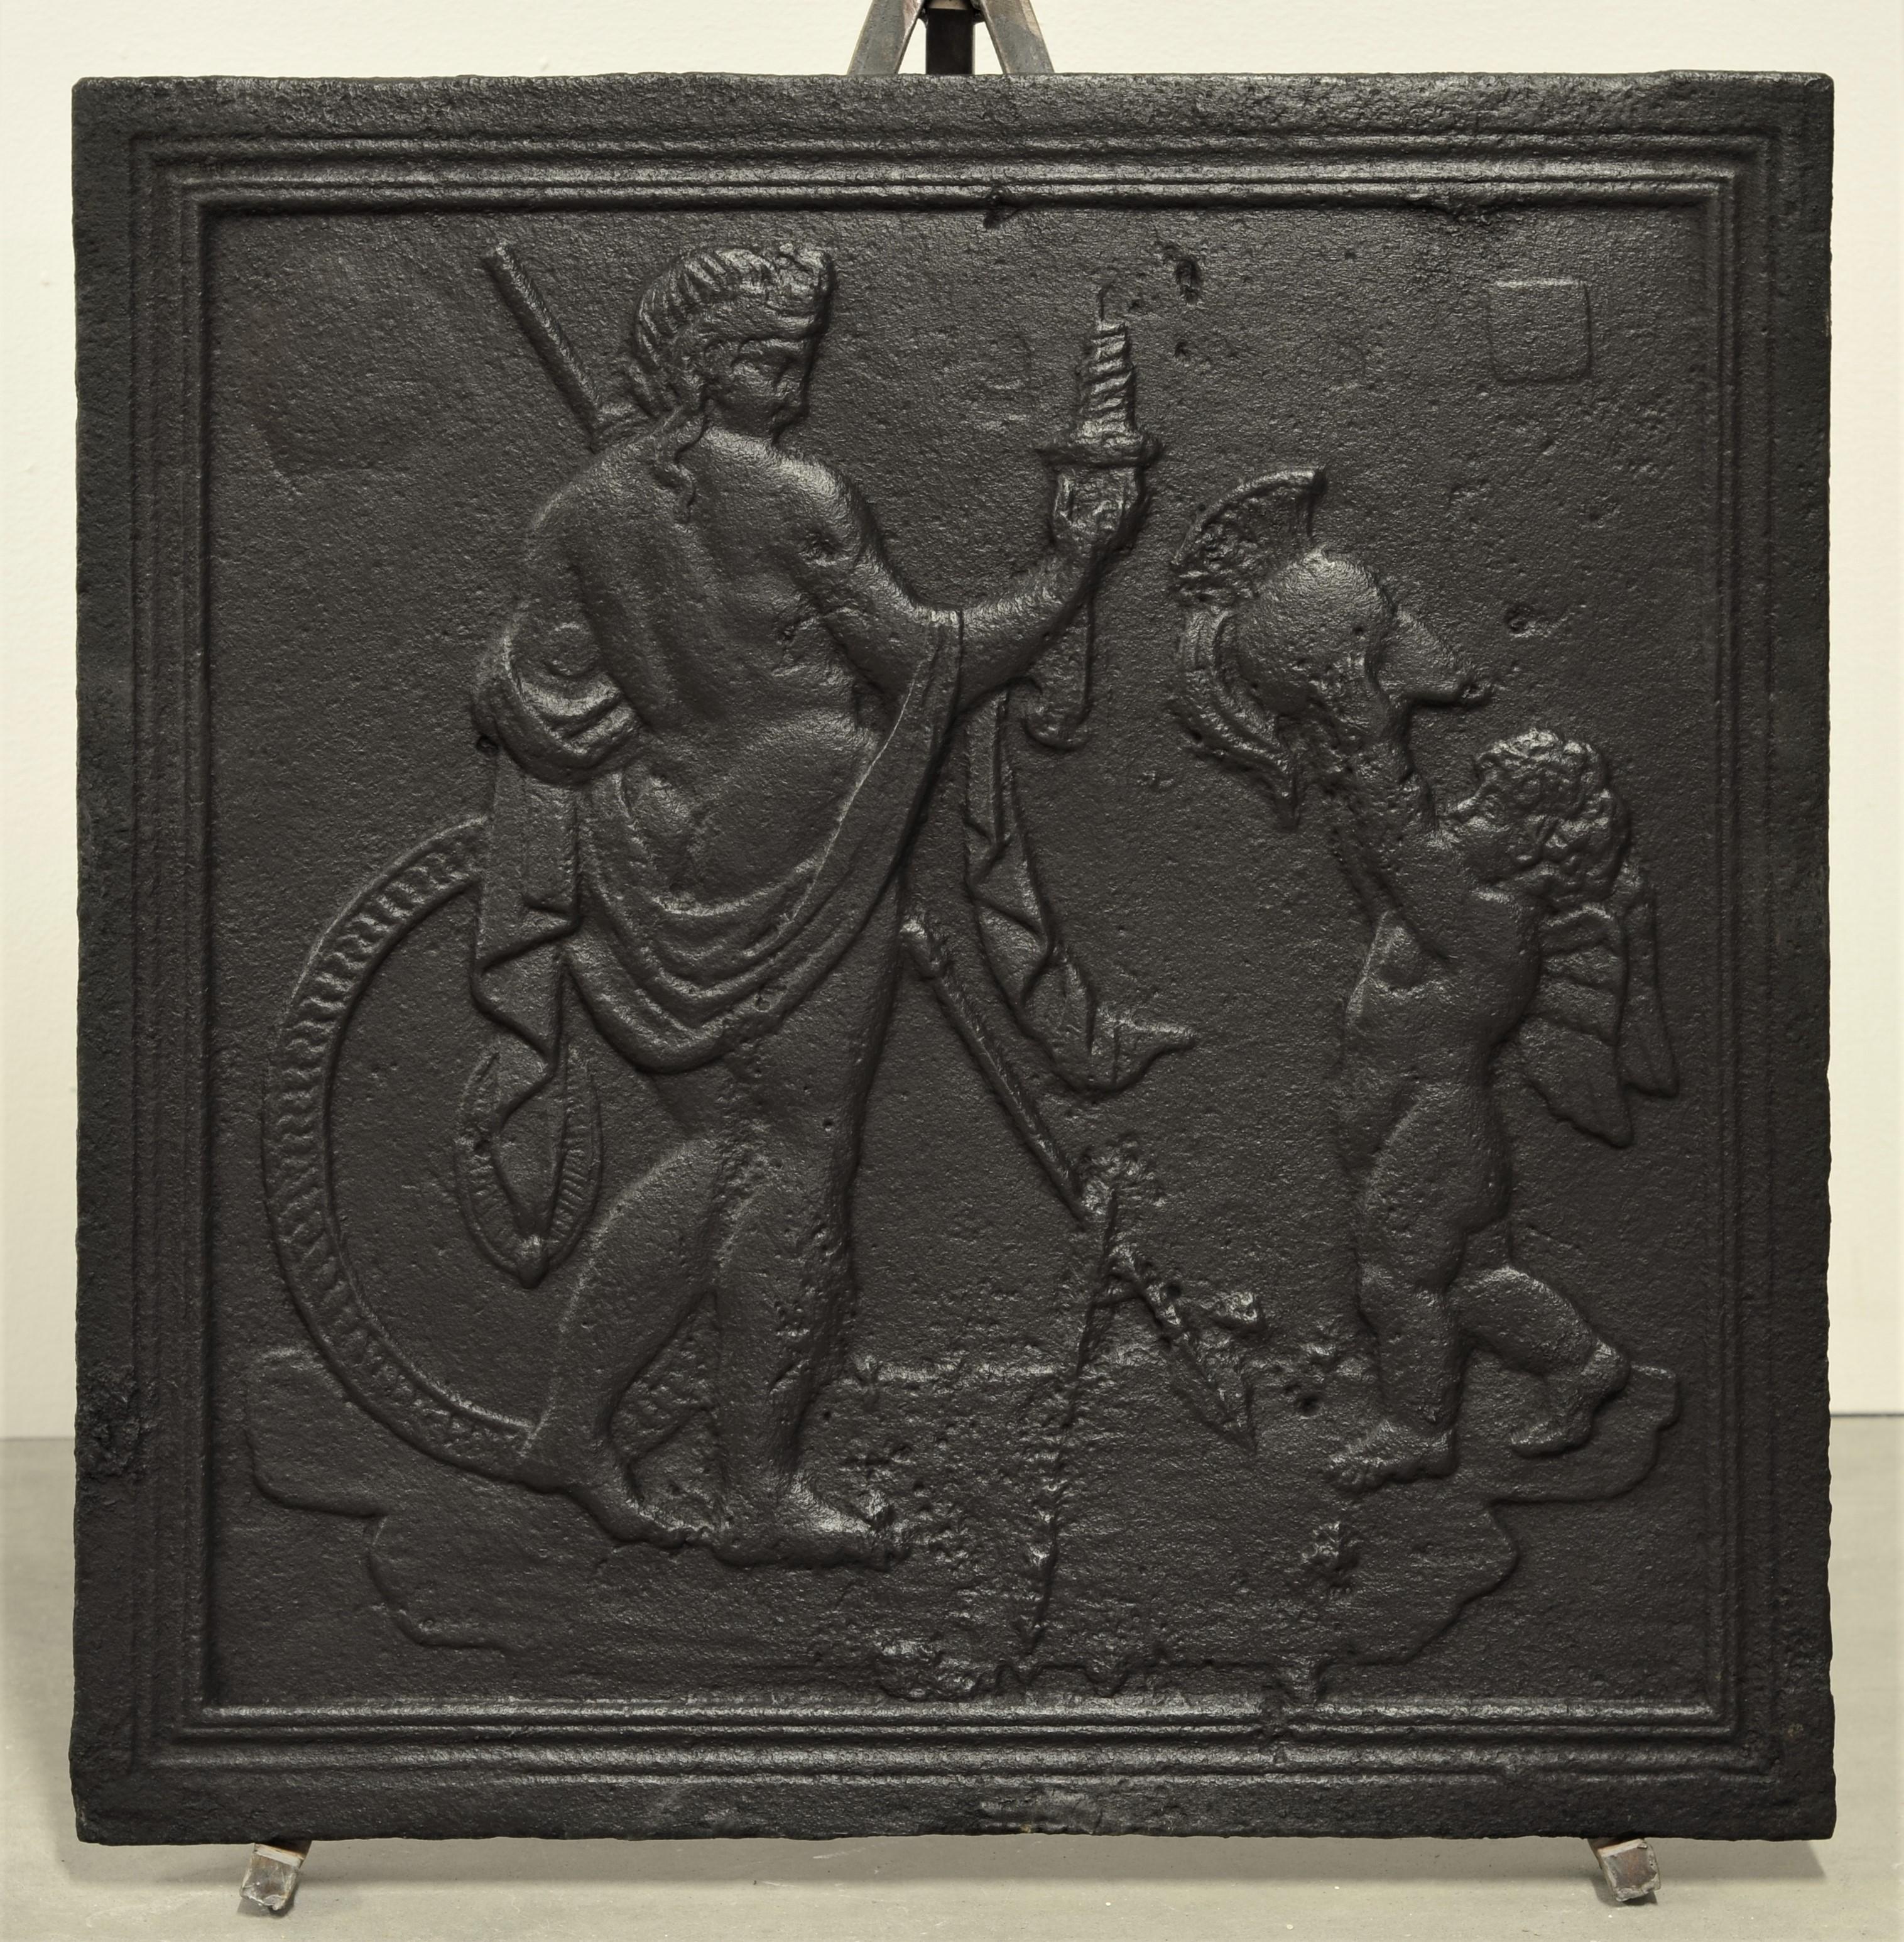 Decorative fireback showing a putti handing a warrior his helmet.
Pristine condition, very sharp casting

Perfect size for a working fire or as a nice backsplash.